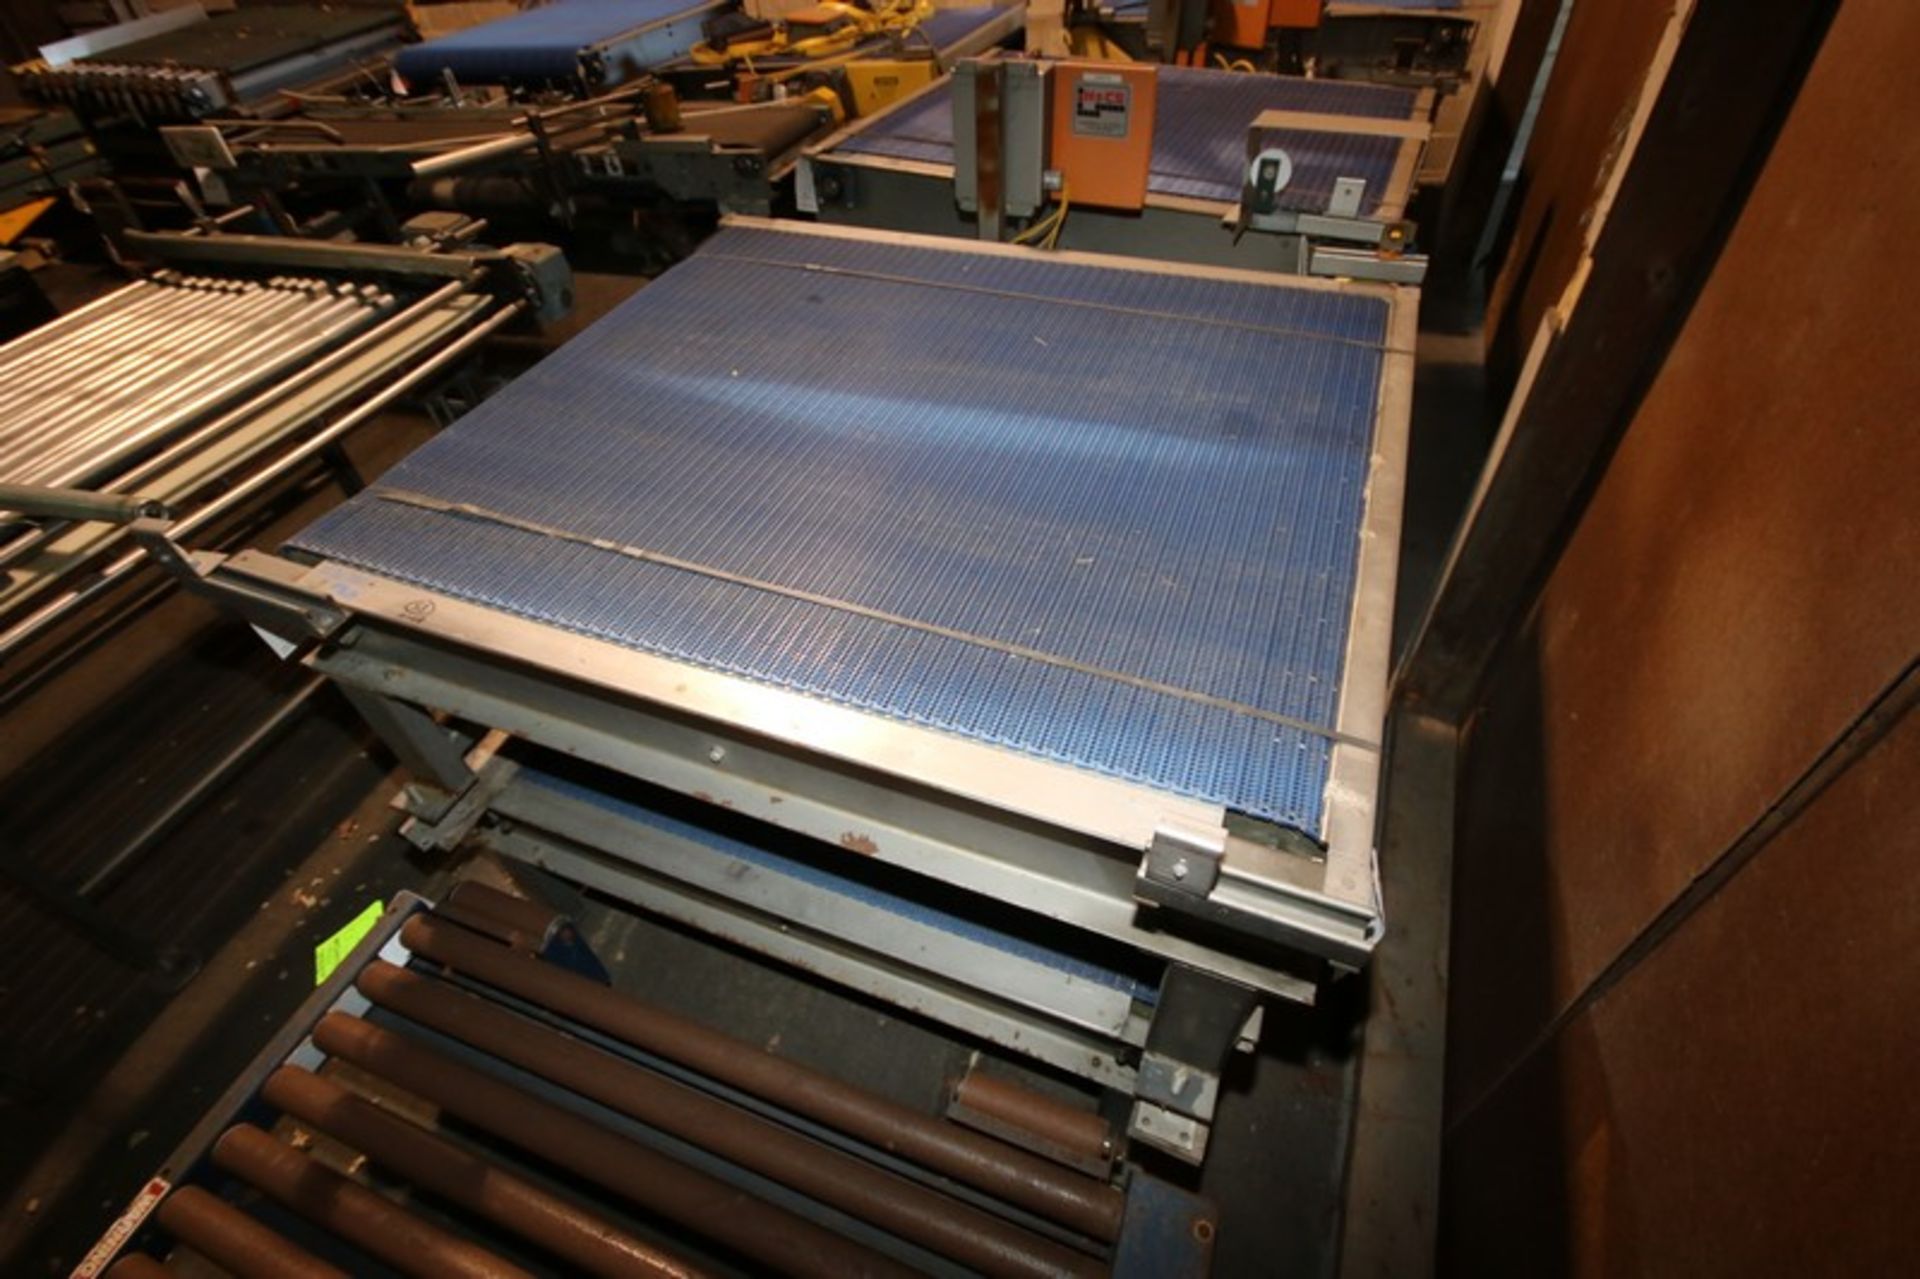 6-Sections of H&CS Conveyors, Overall Dims.:Aprox. 60" L x 64" W x 36" H, with Plastic Blue Belt, - Image 7 of 7